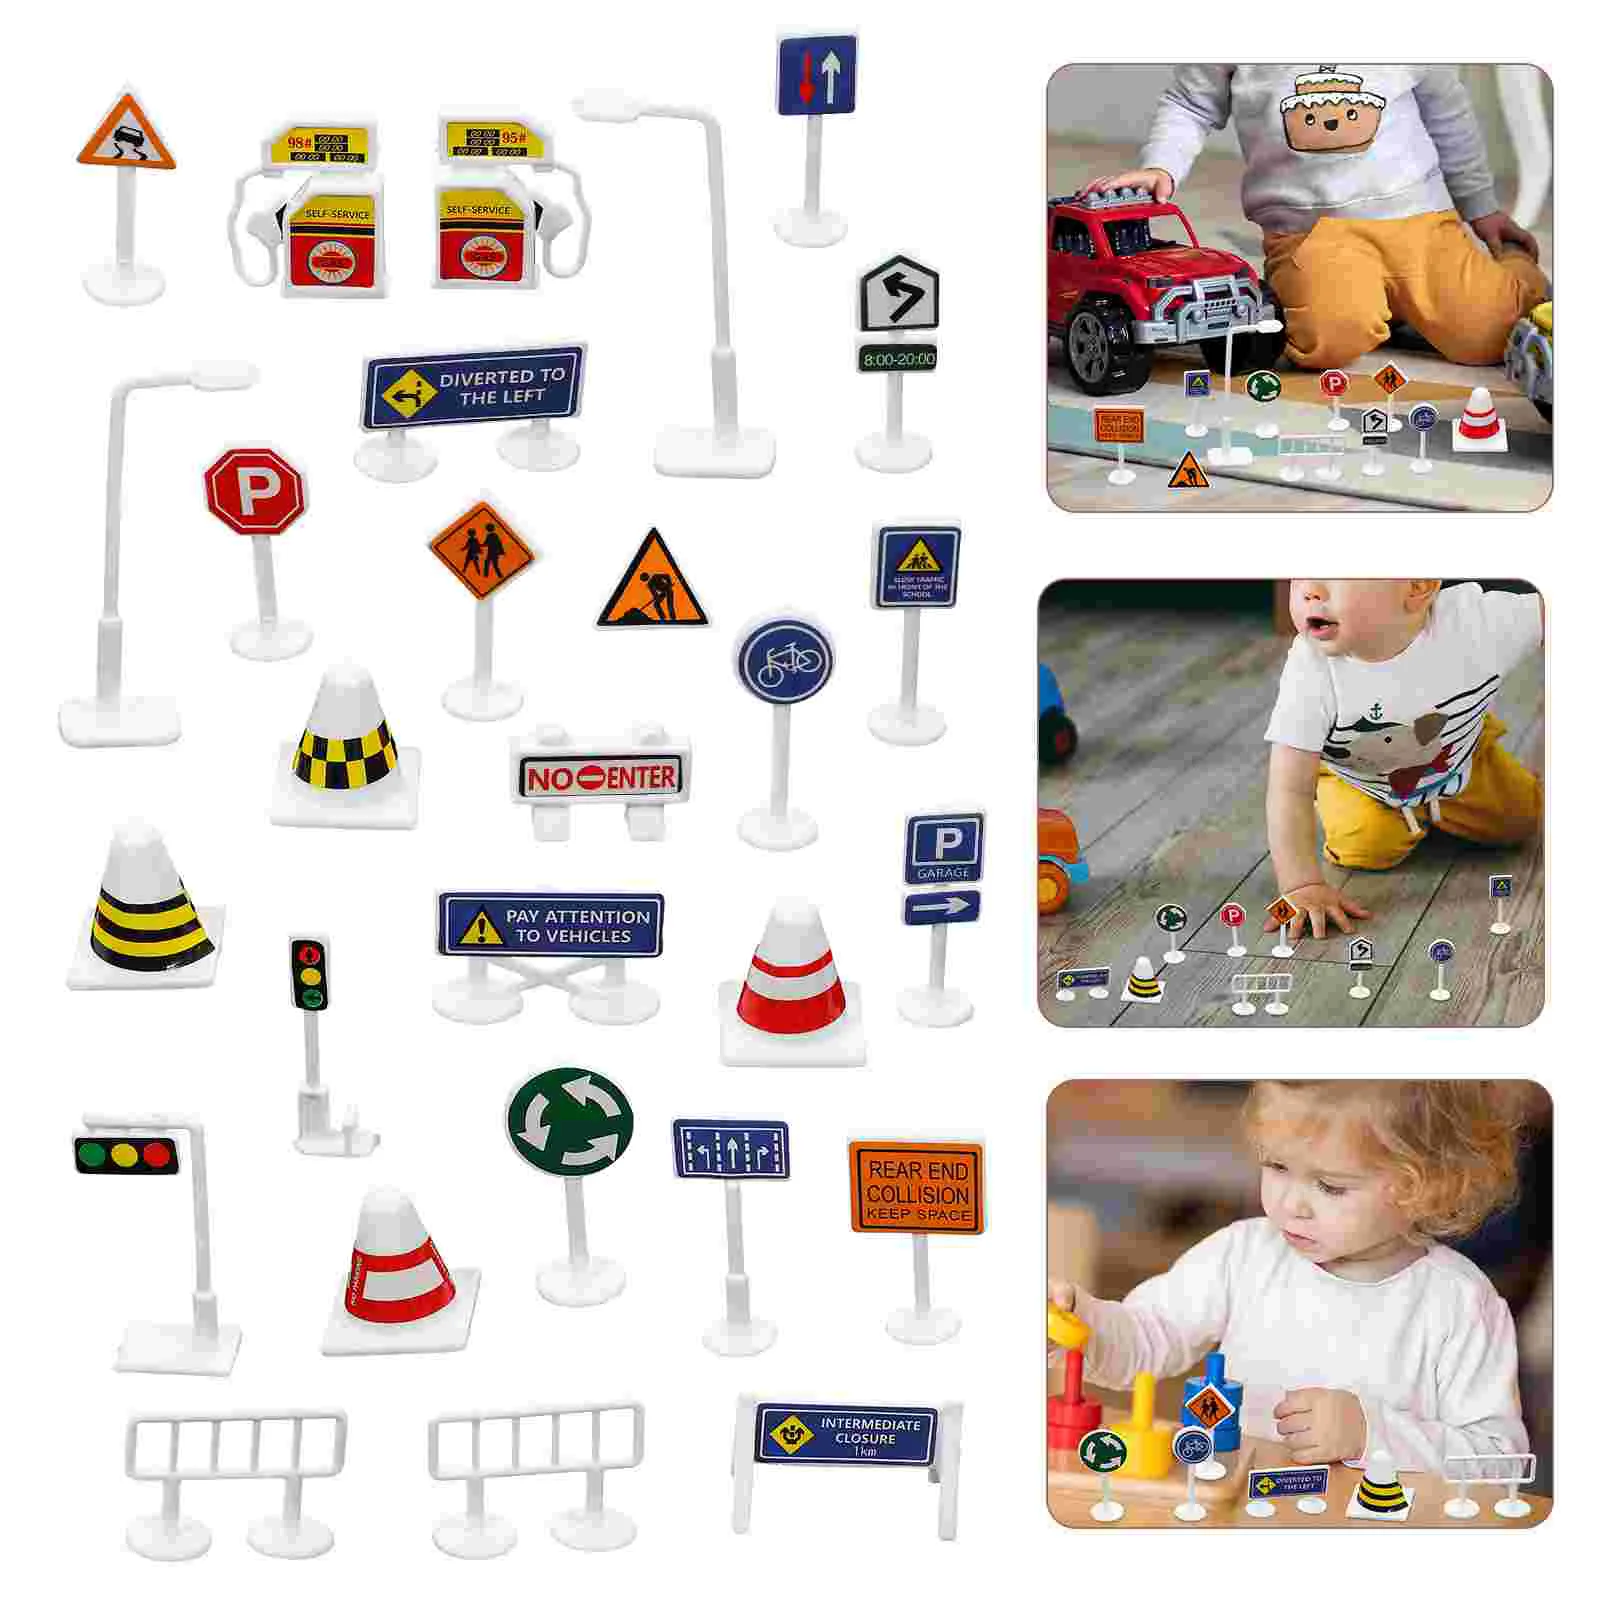 

28 Pcs Children's Traffic Signs Mini Cones Street Road Early Education Toys For Kids Model Cognition